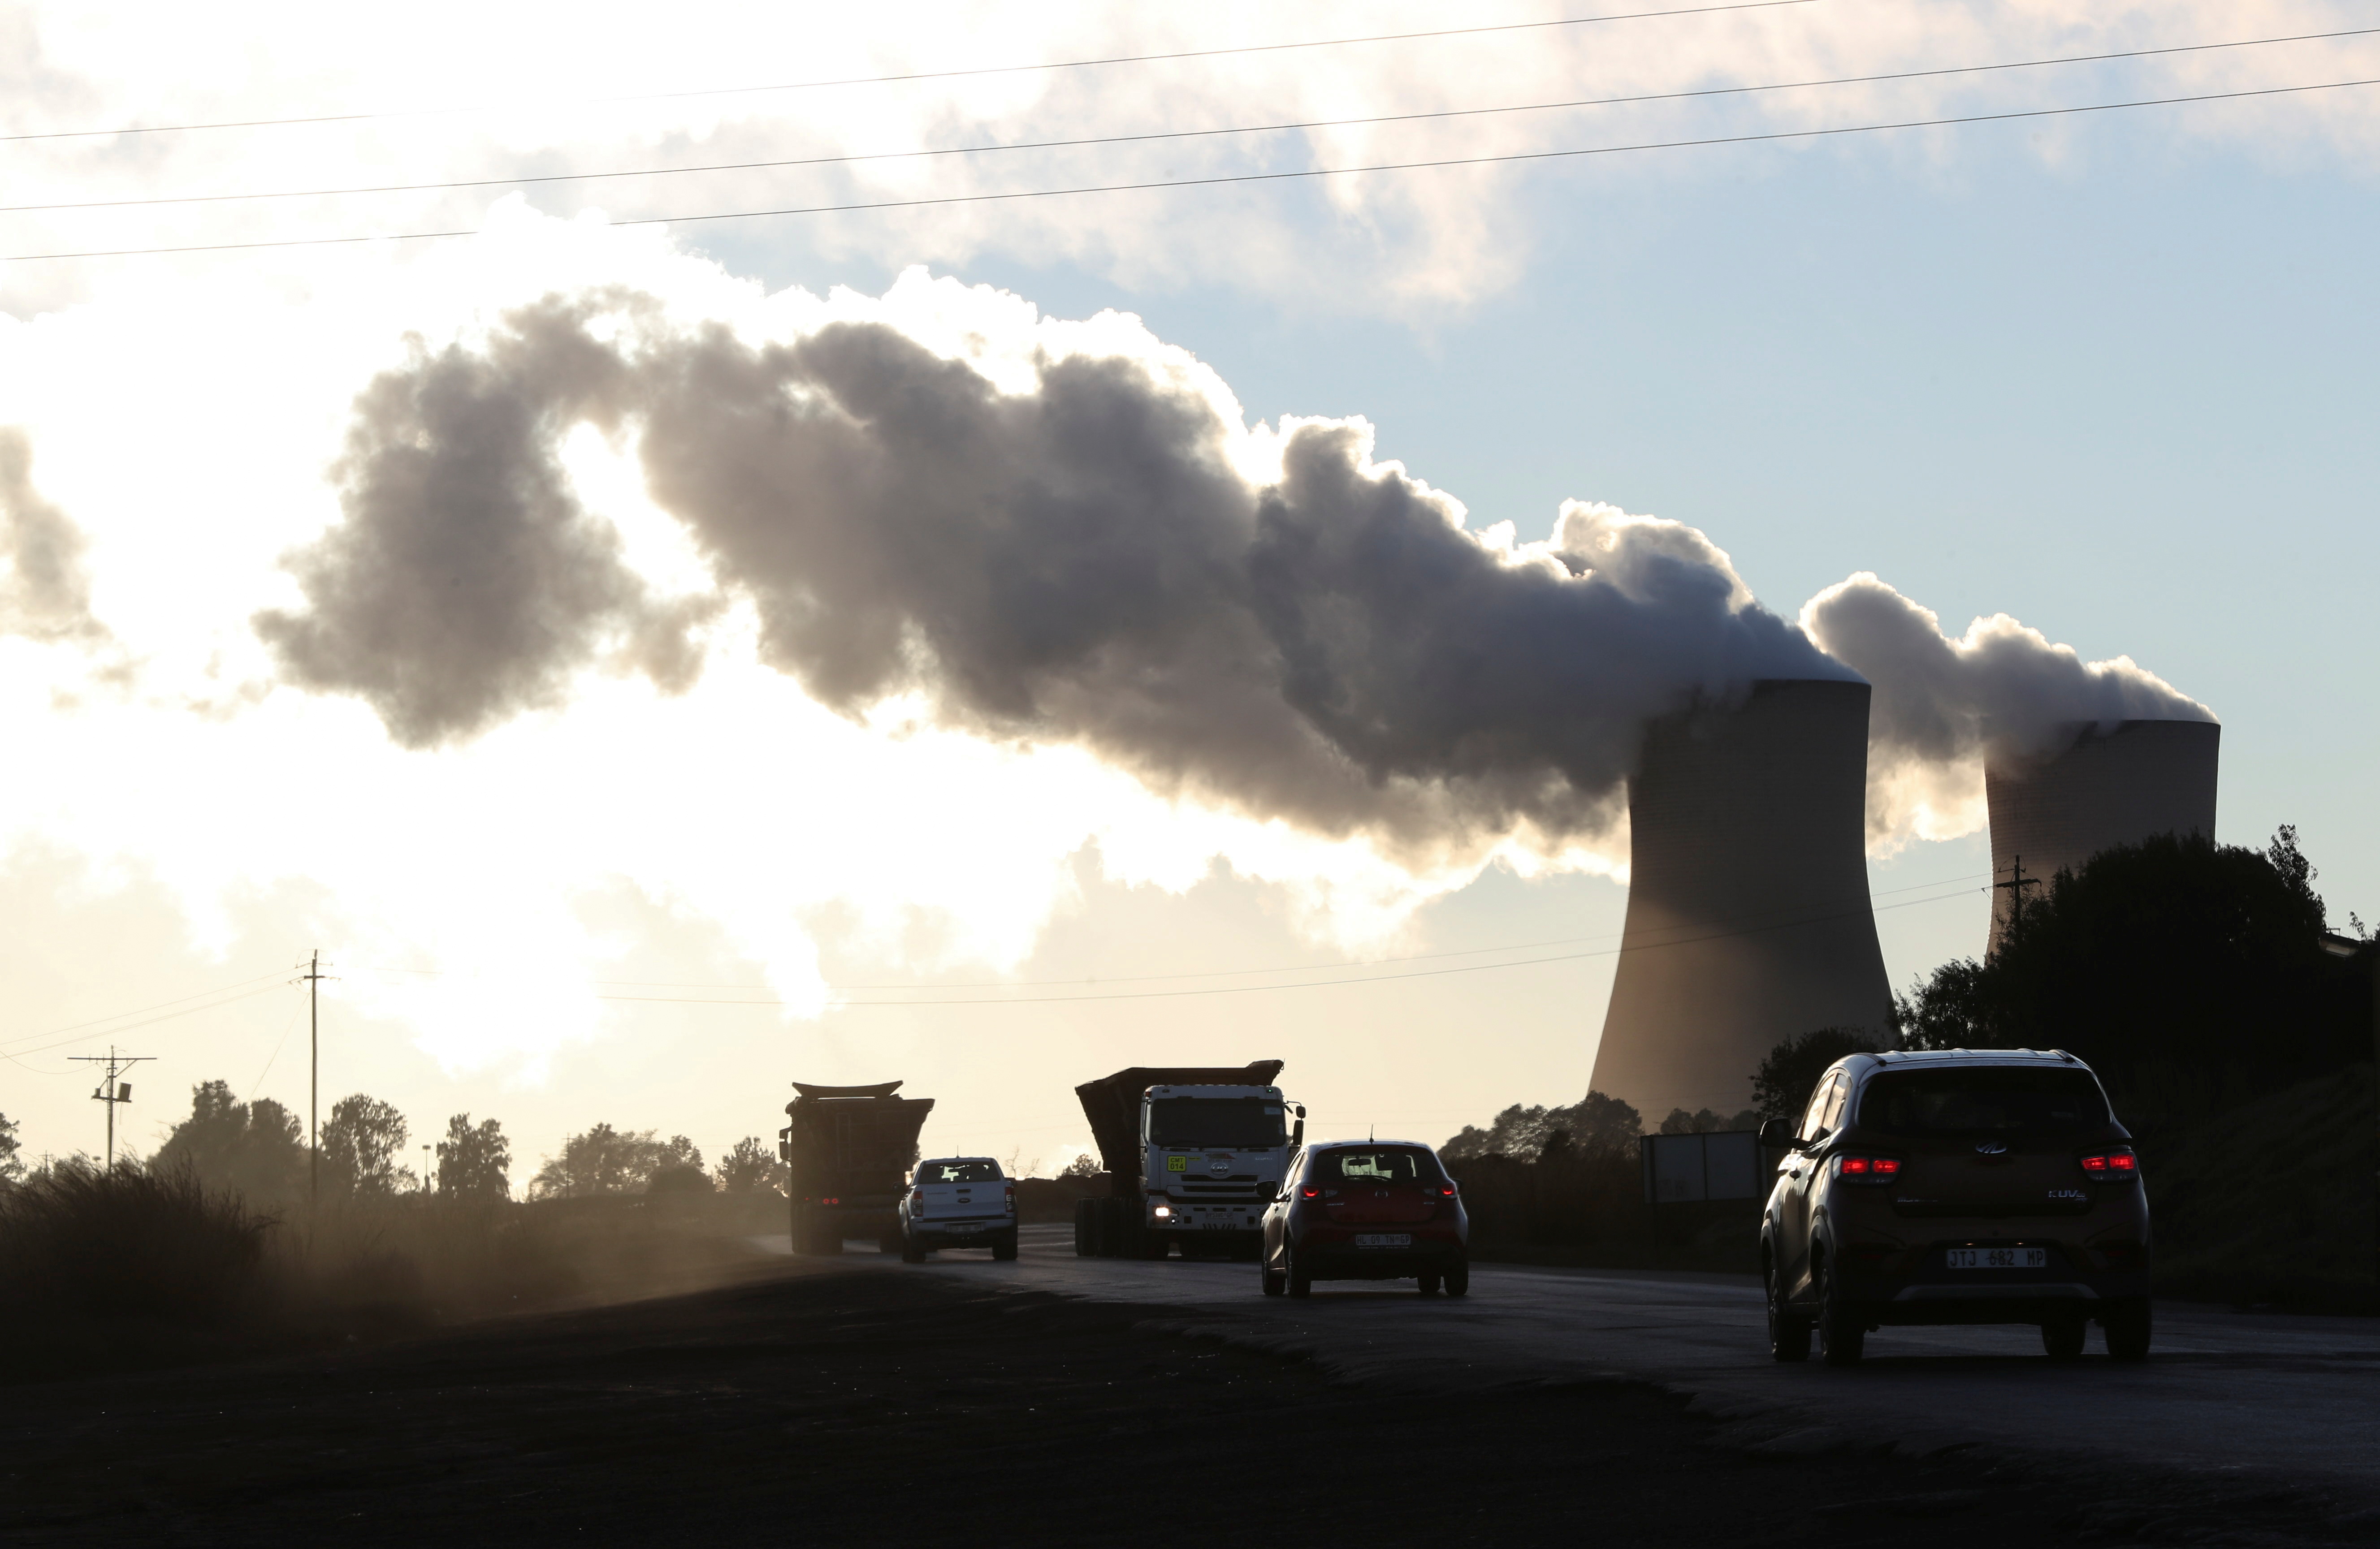 Trucks and cars are seen driving past while smoke rises from the Duvha coal-based power station owned by state power utility Eskom in Emalahleni